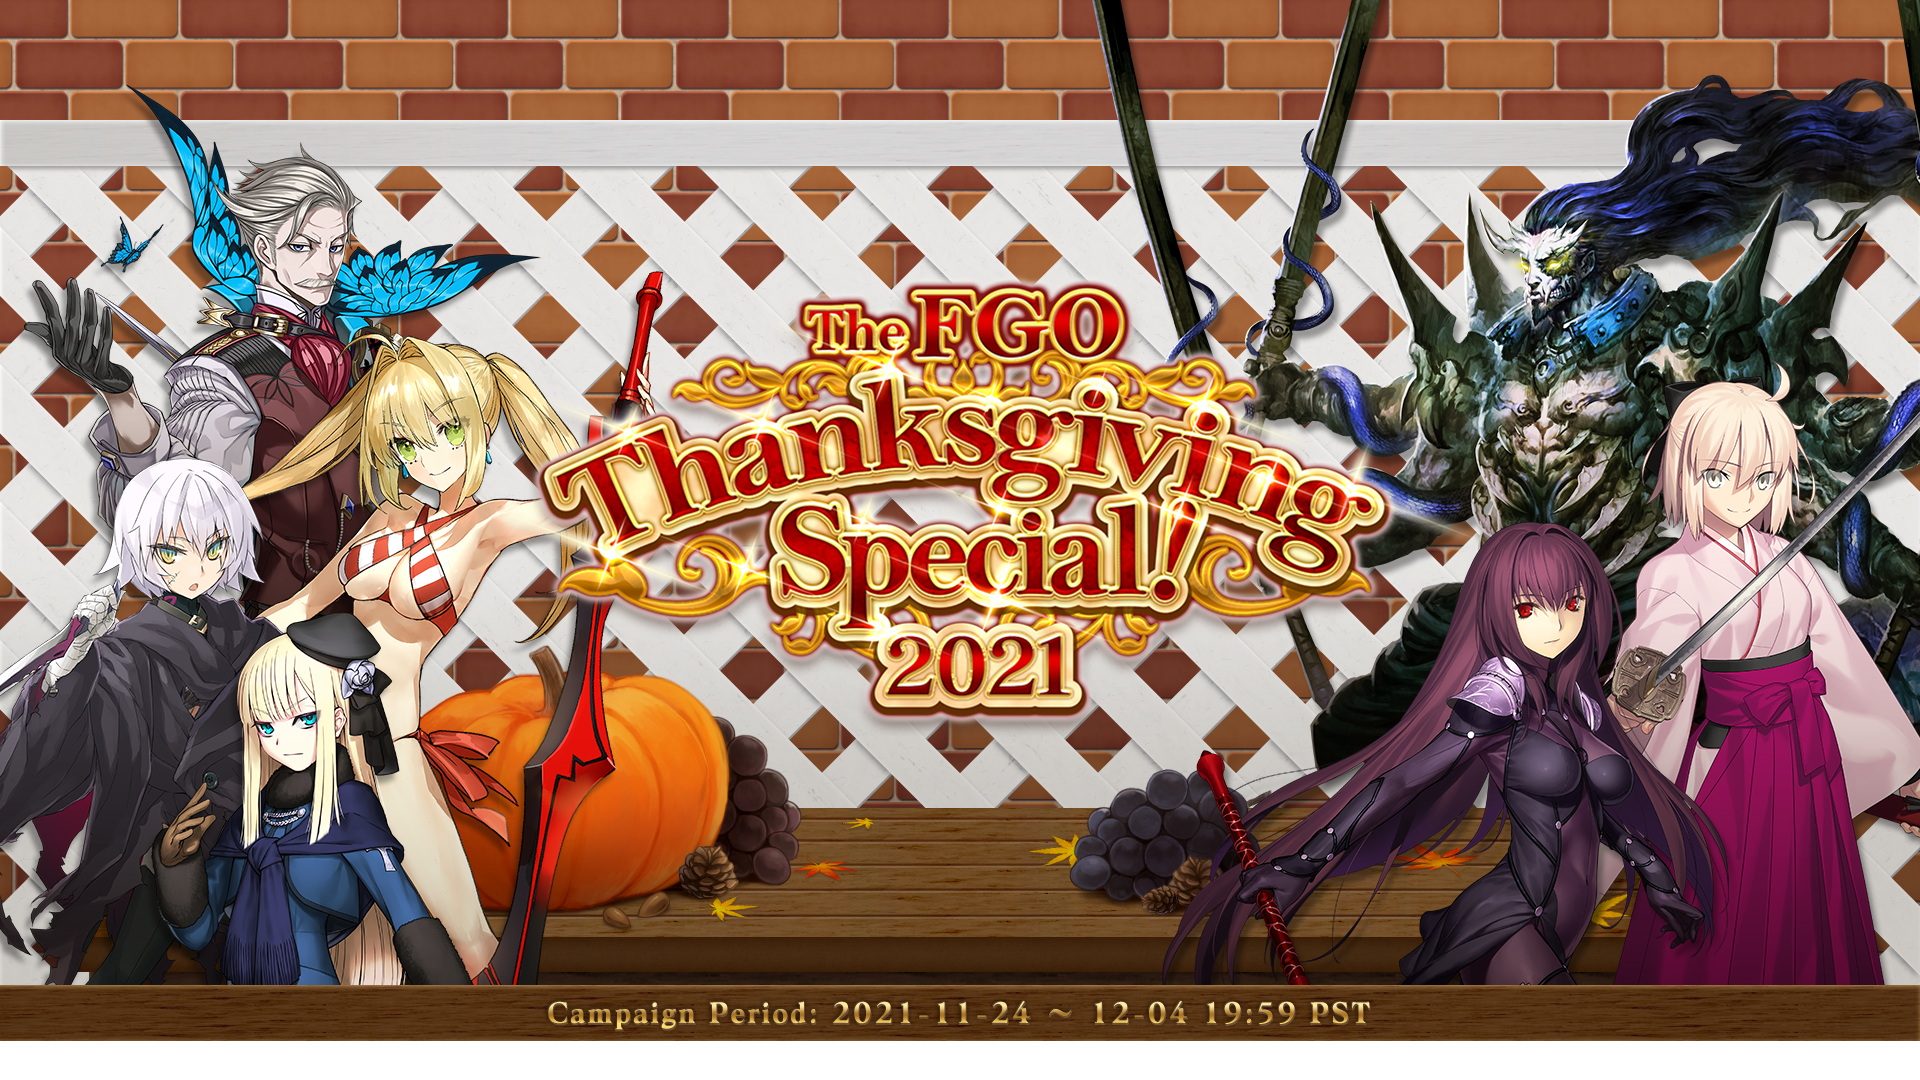 The FGO Thanksgiving Special! 2021  Event Period: 2021.11.24 - 12.01 19:59 PST